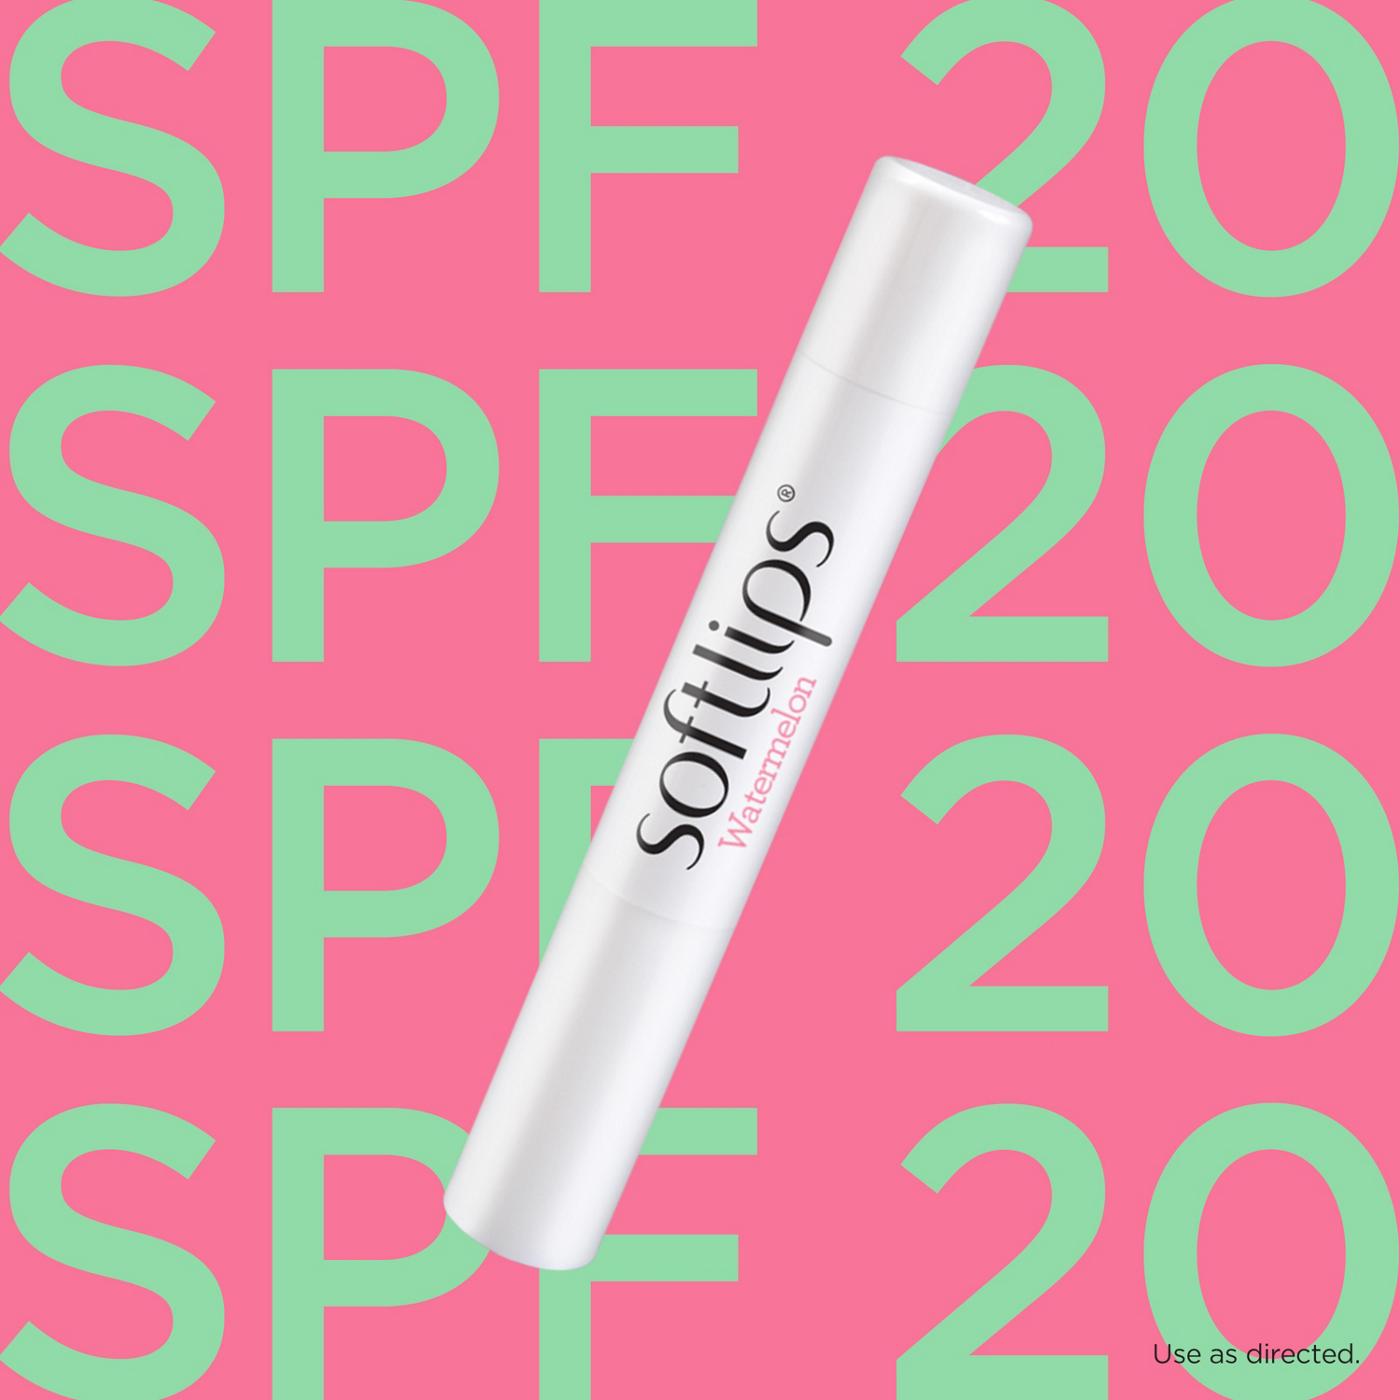 Softlips Watermelon SPF 20 Lip Protectant; image 8 of 8